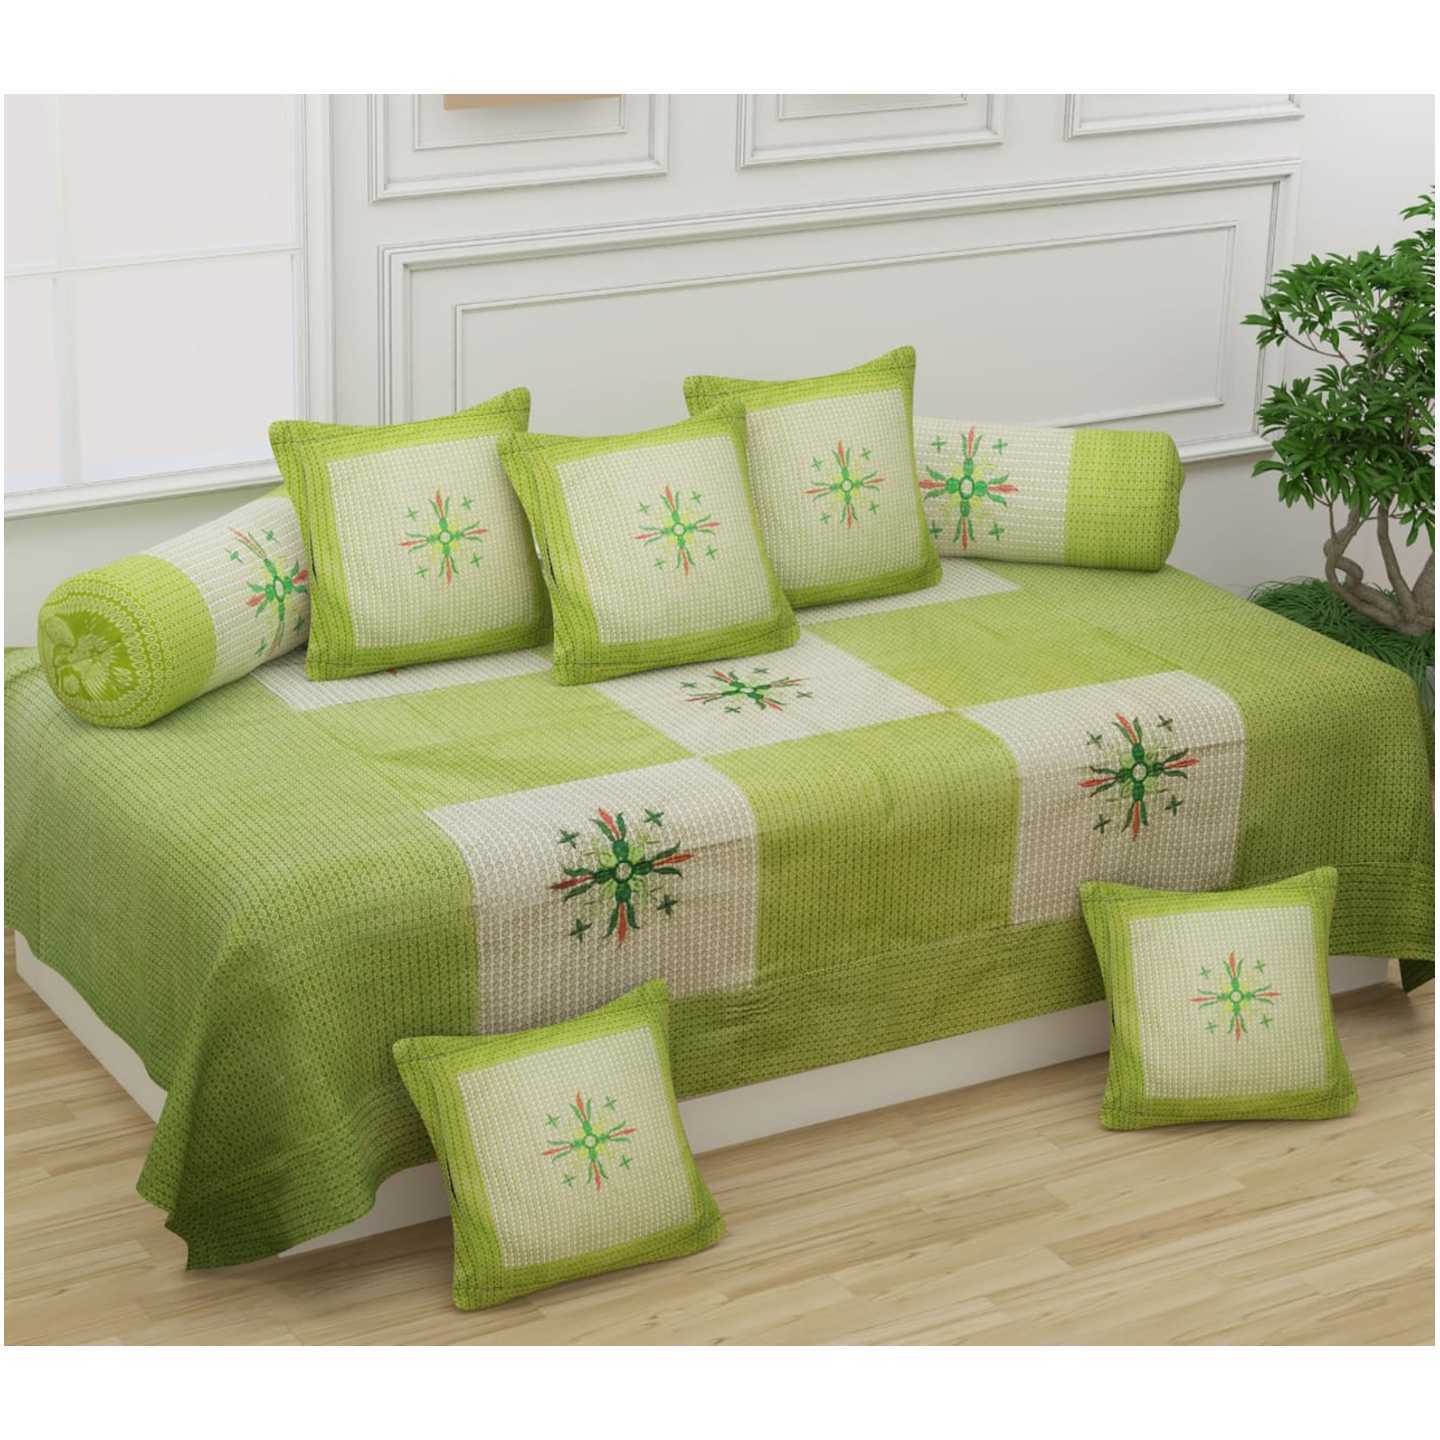 Handtex Home Cotton Fabric Embroidery Design Diwan Set Covers 8 Pcs Set of 1 Bedsheet 2 Bolsters and 5 Cushion Covers (Green)